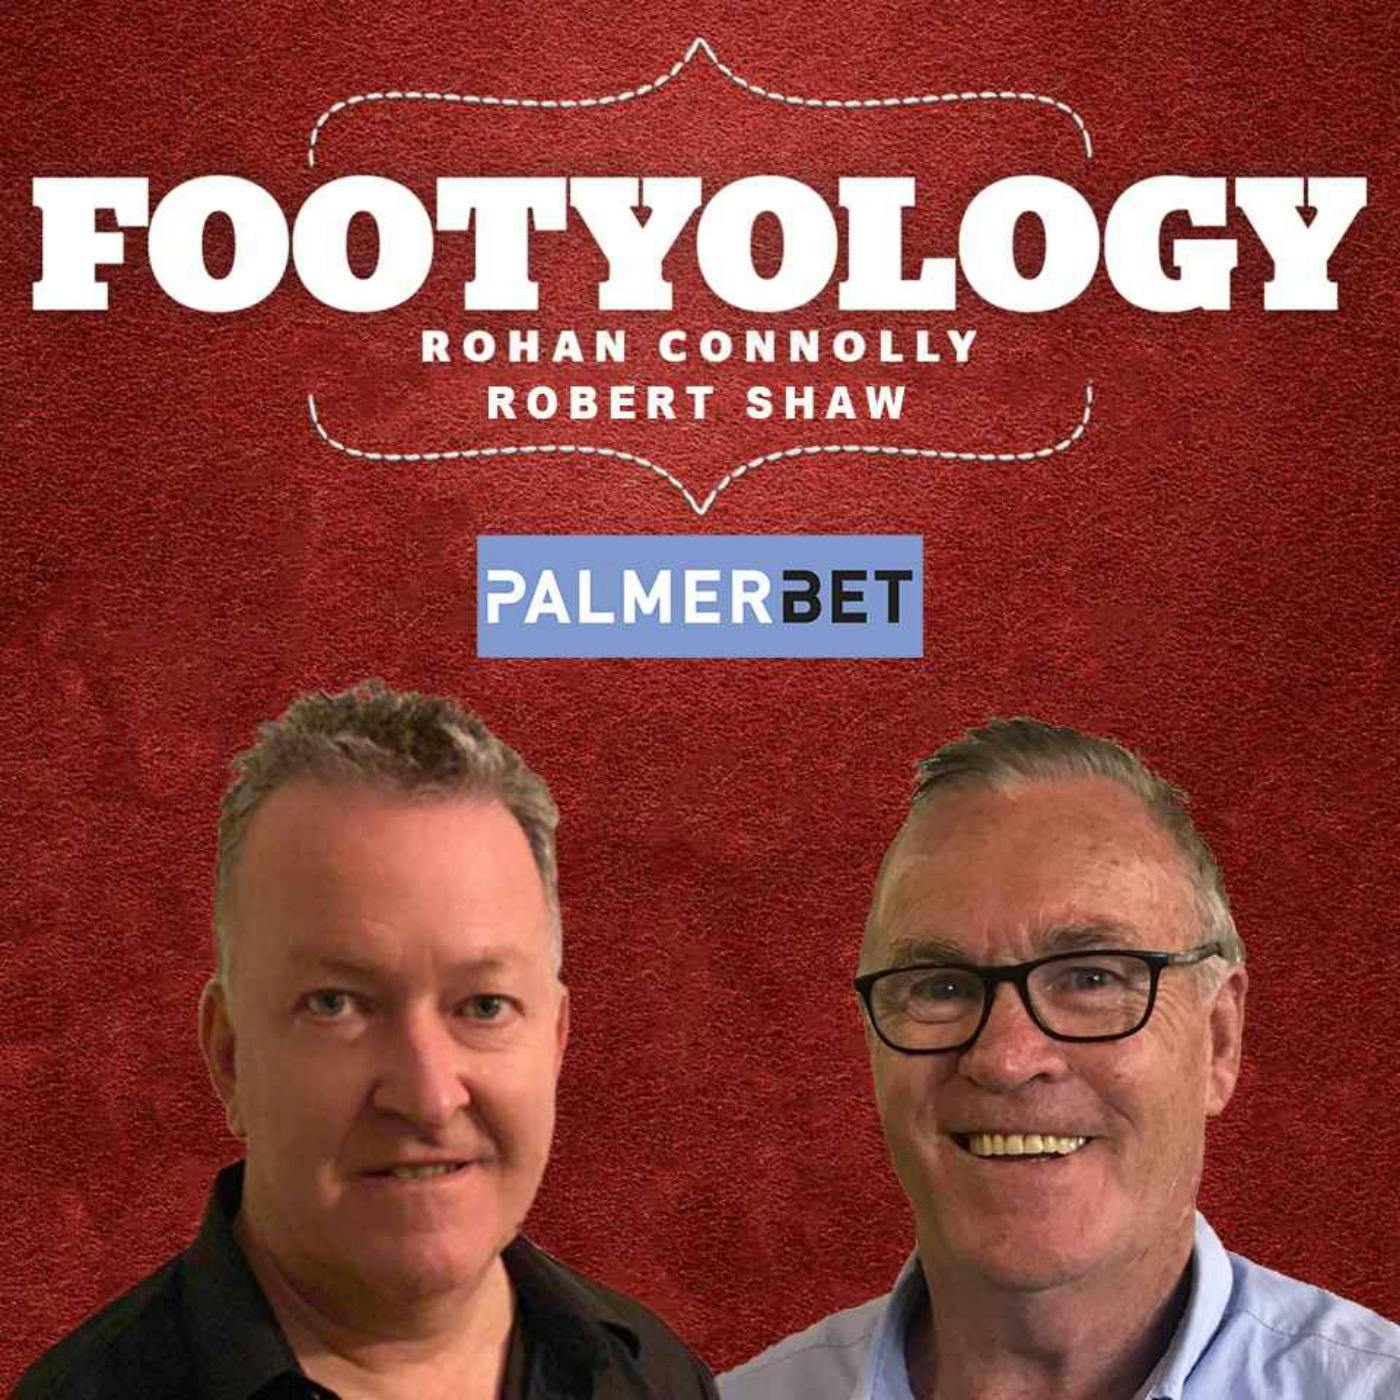 Footyology Podcast - September 25th 2022